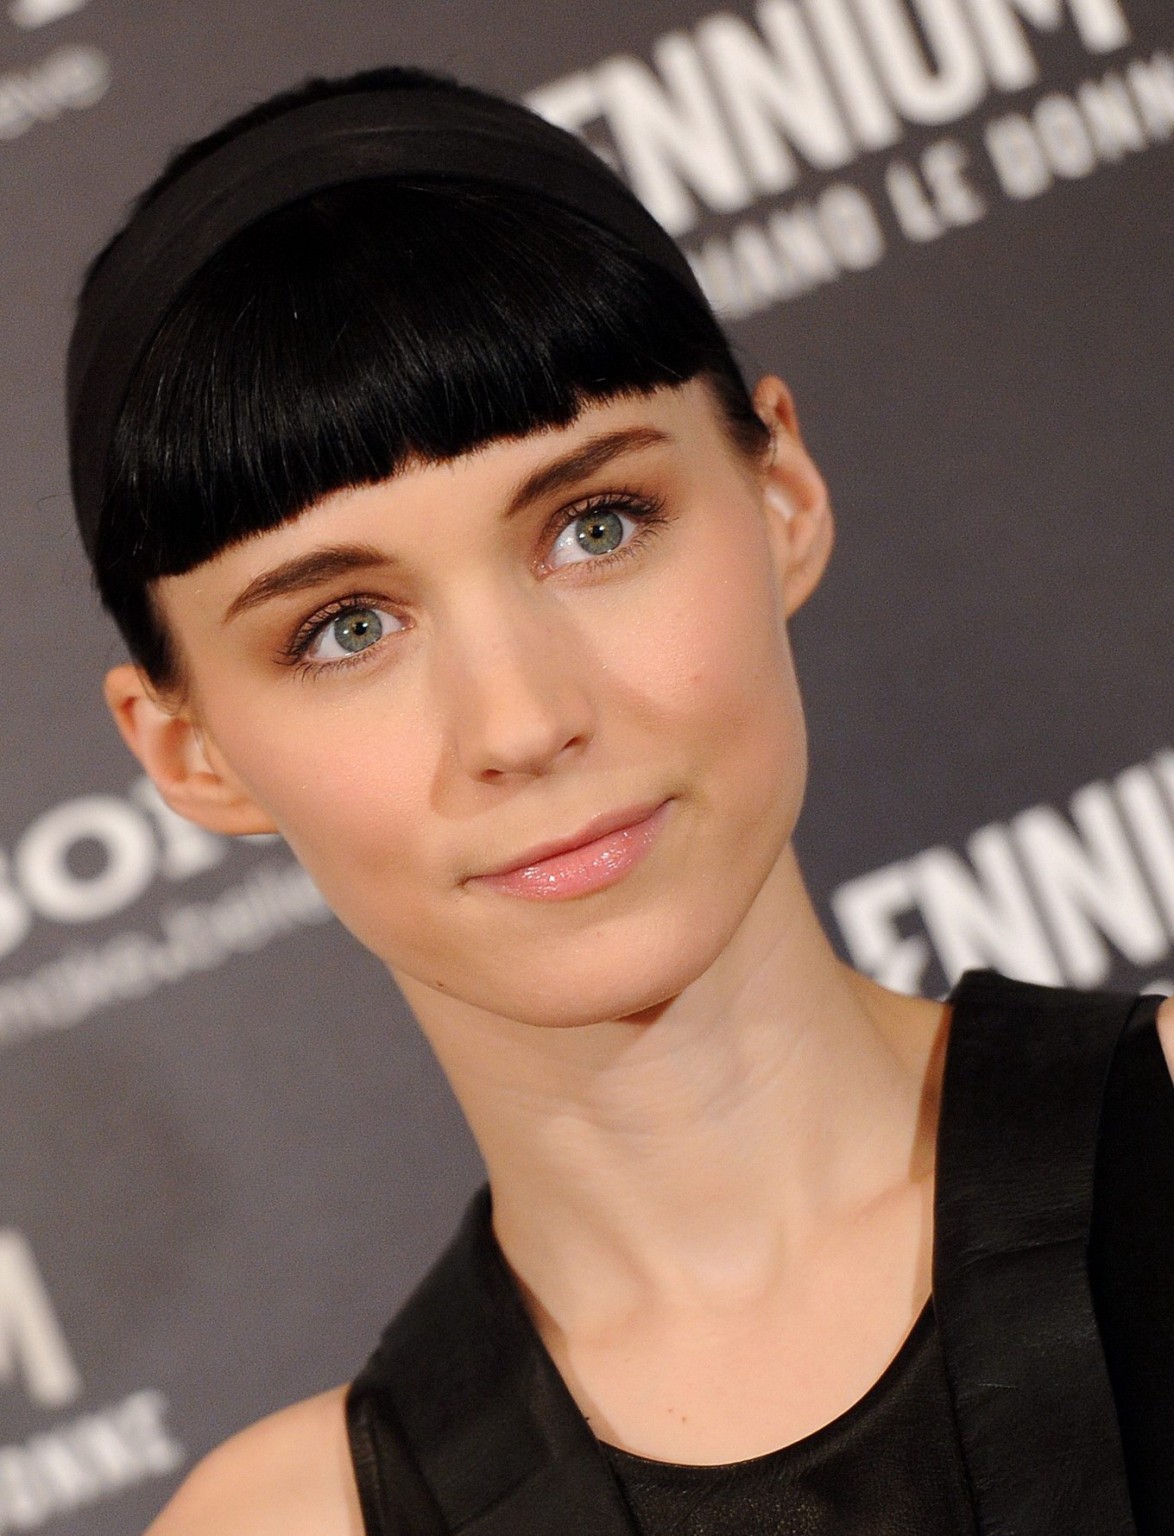 Rooney Mara wearing black leather dress at 'The Girl With the Dragon Tattoo' pho #75276666